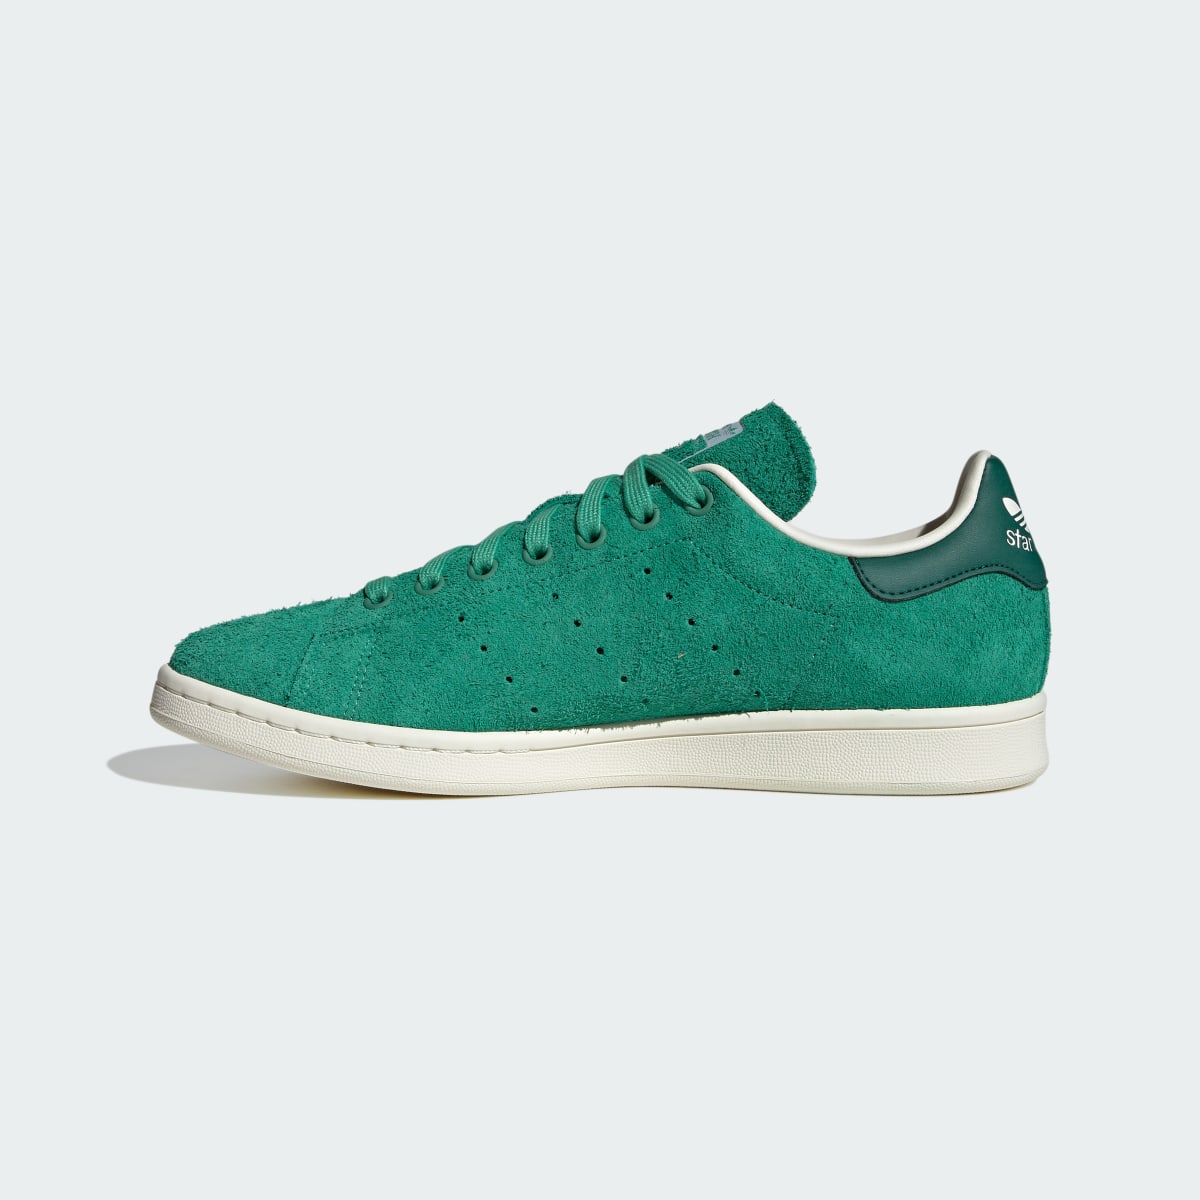 Adidas Stan Smith Shoes. 7